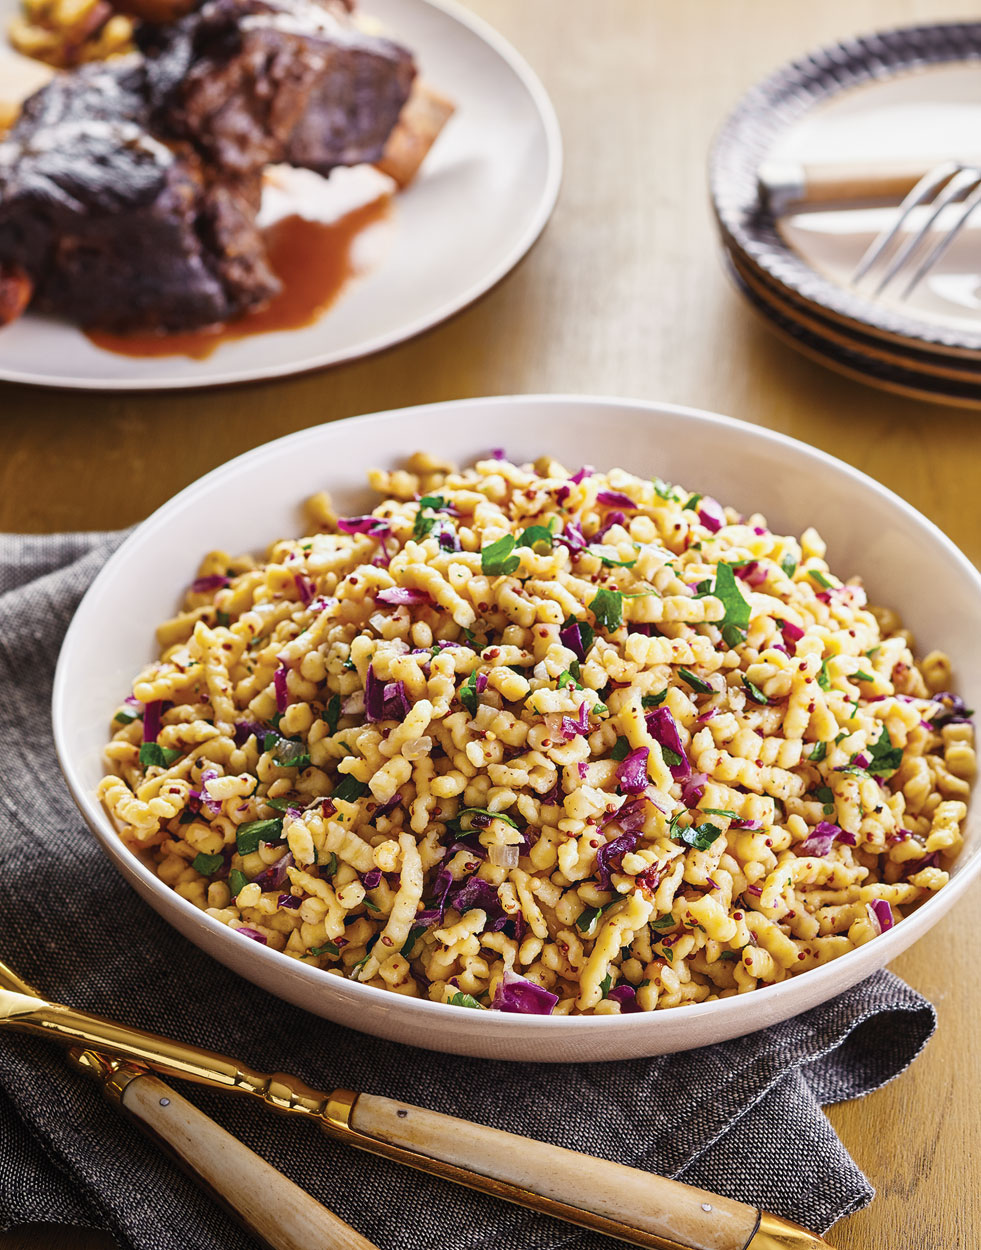 Apple Spaetzle with Mustard & Red Cabbage